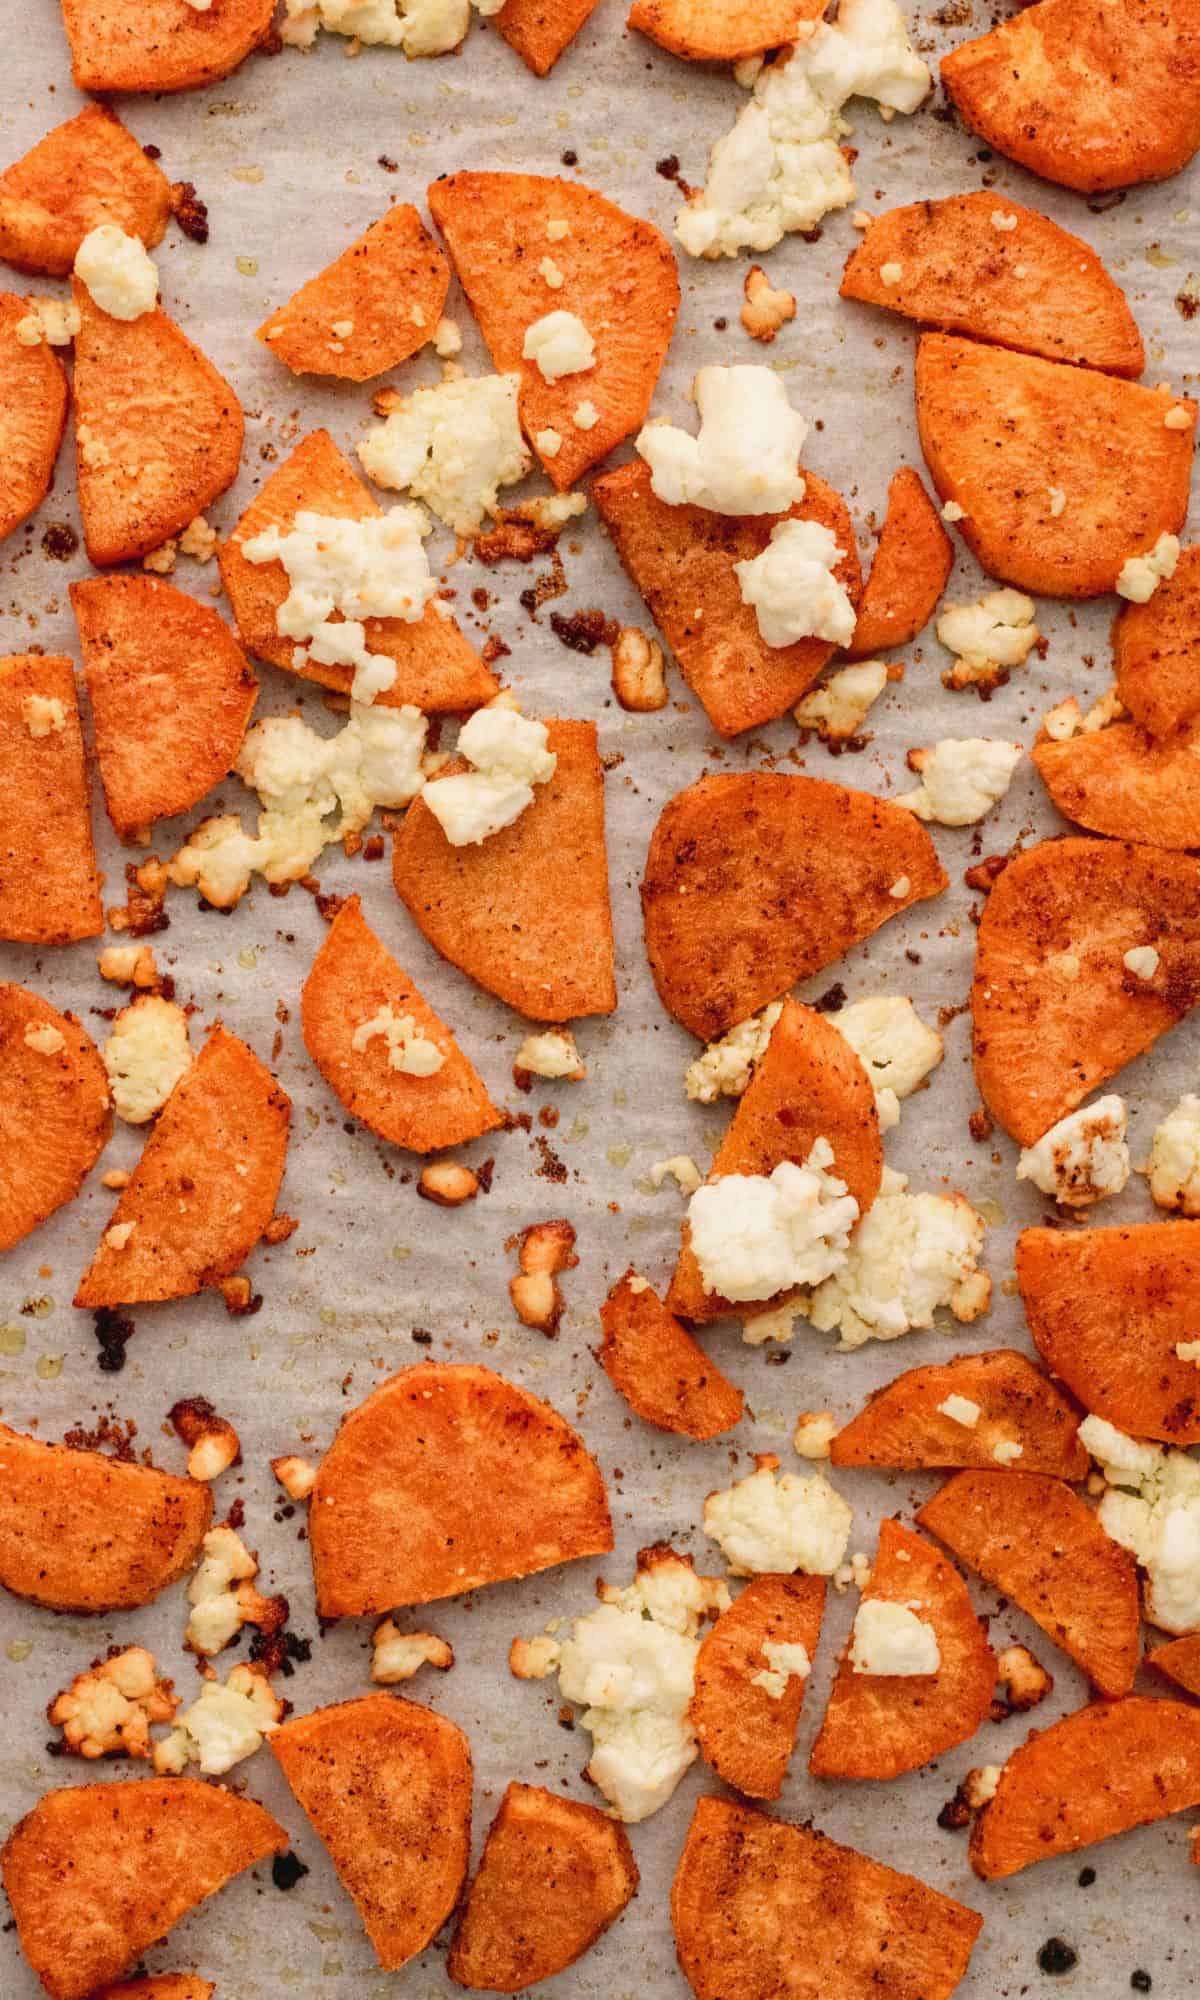 Sliced sweet potatoes and goat cheese on baking sheet.